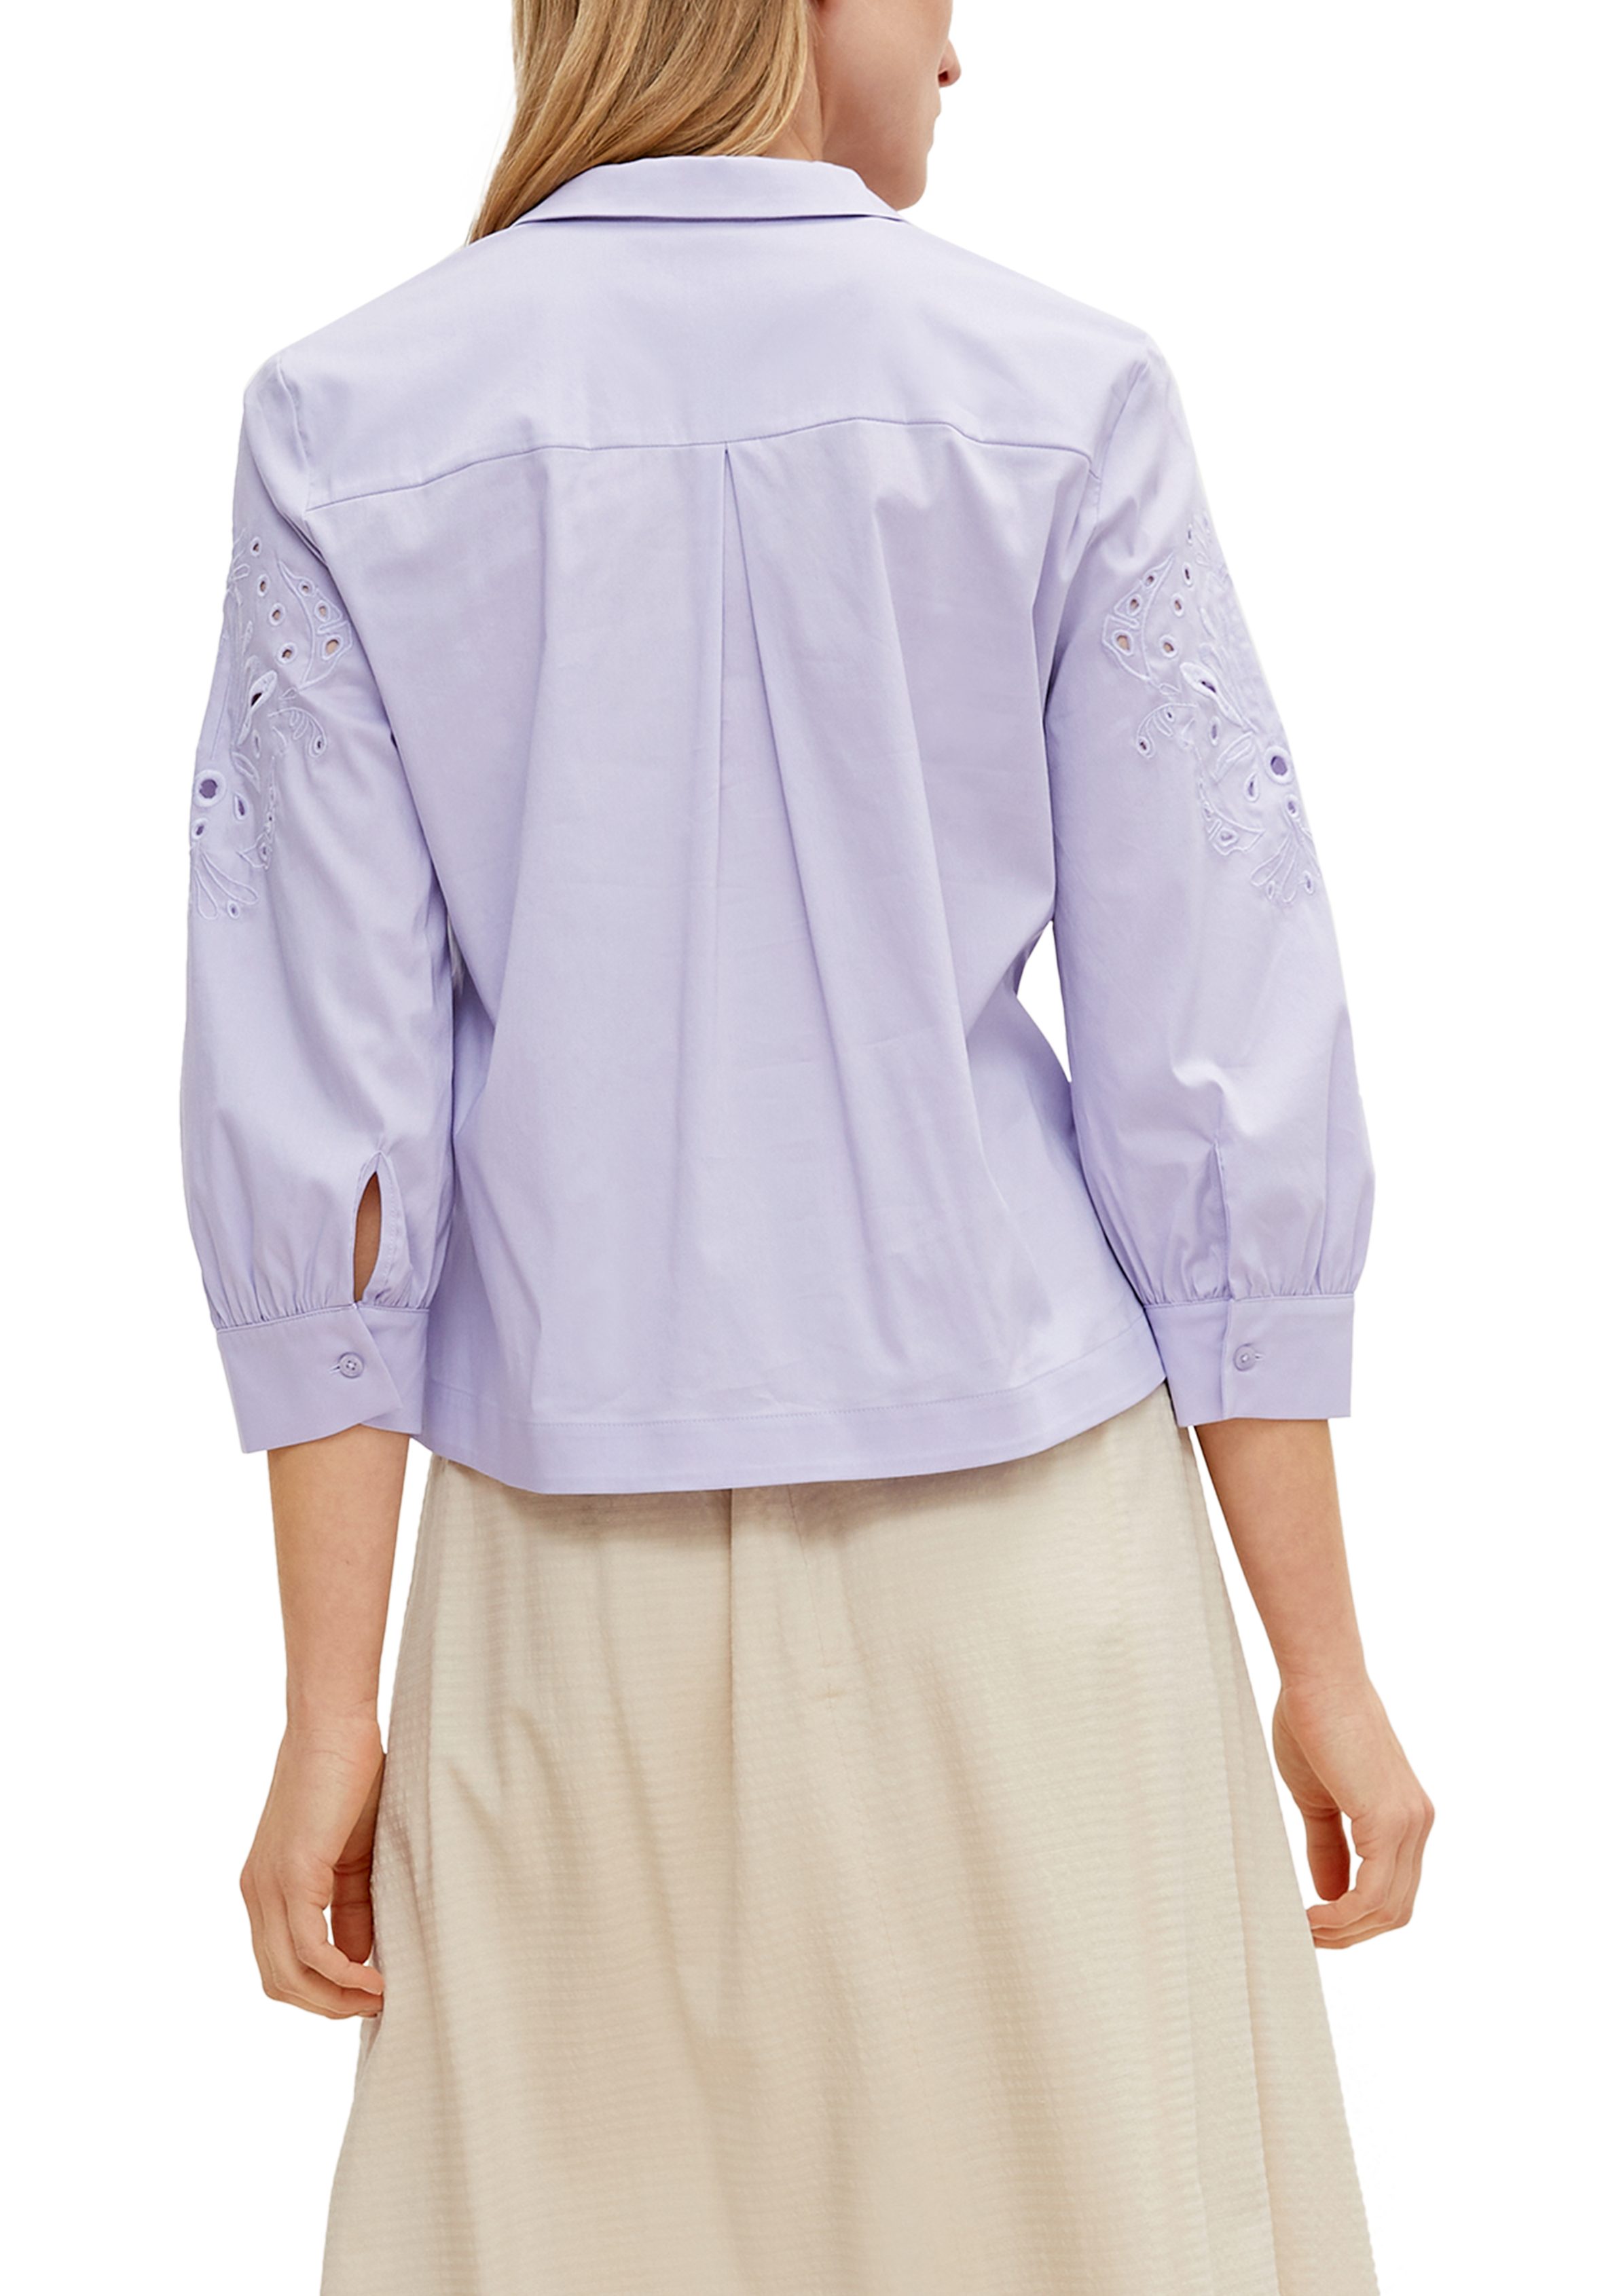 Broderie Anglaise Lochstickerei lilac mit 3/4-Arm-Shirt pale Comma Bluse